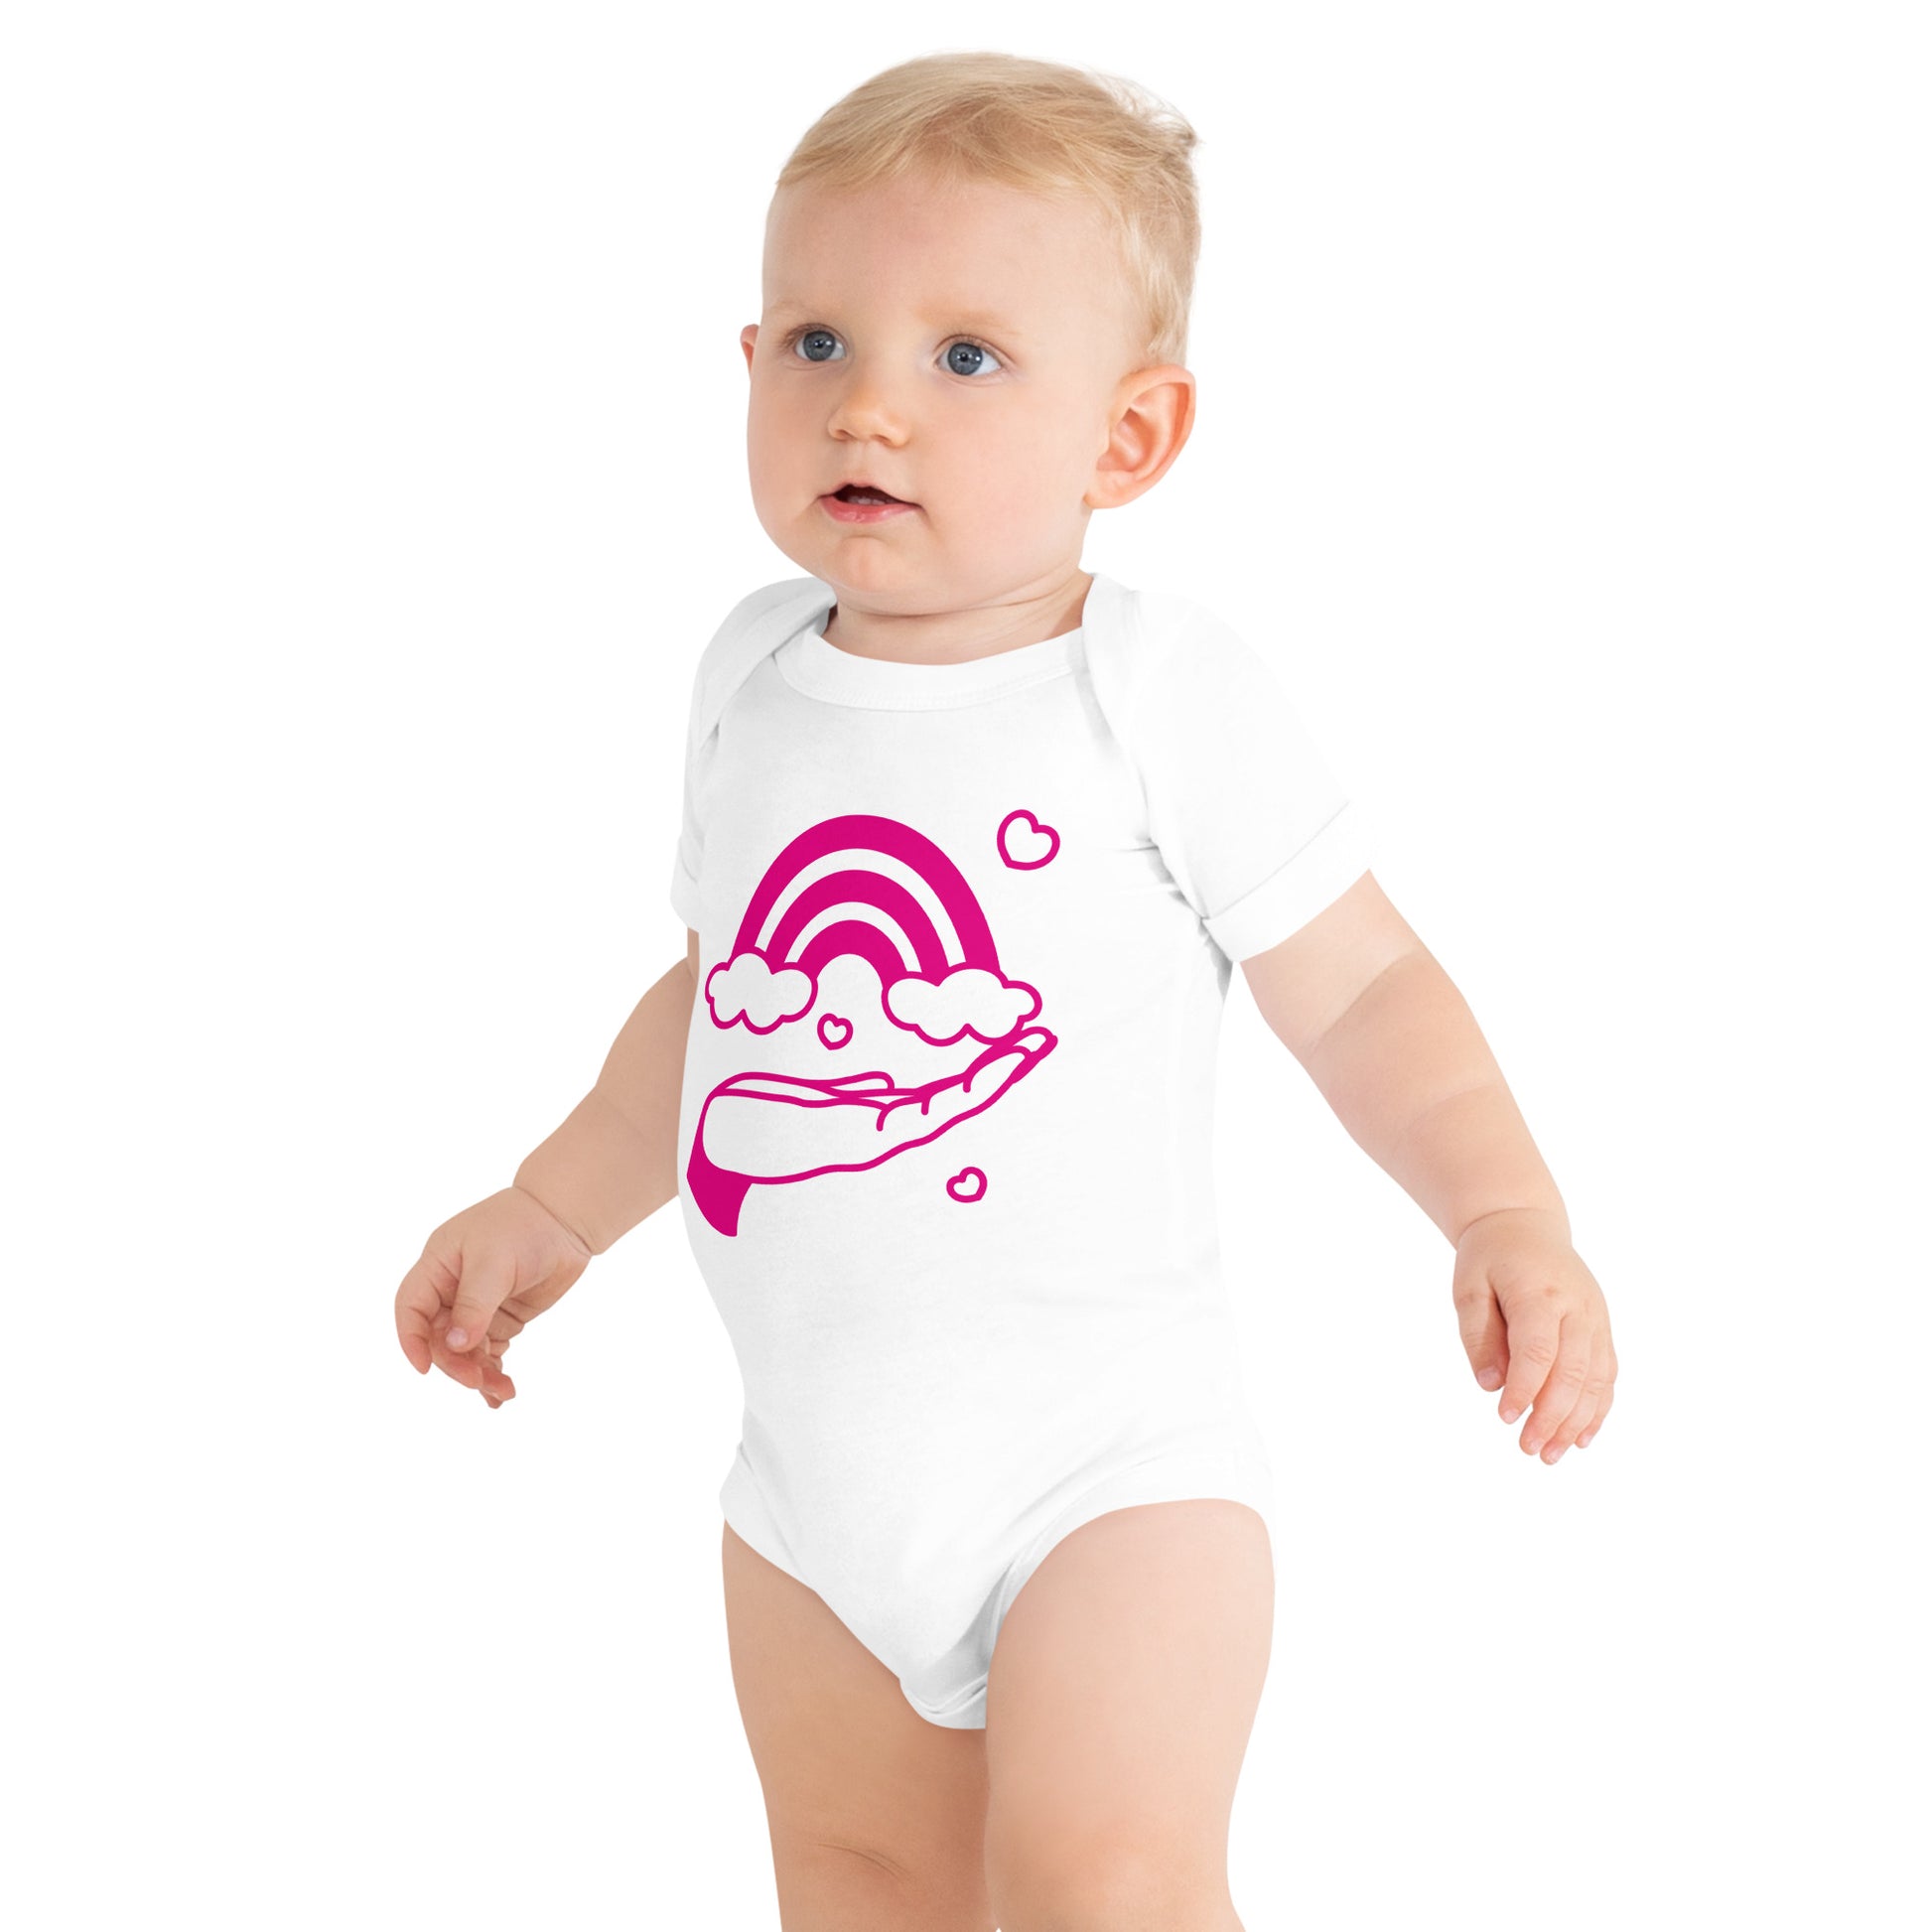 baby with white short sleeve one piece with print of pink hand holding a pink rainbow